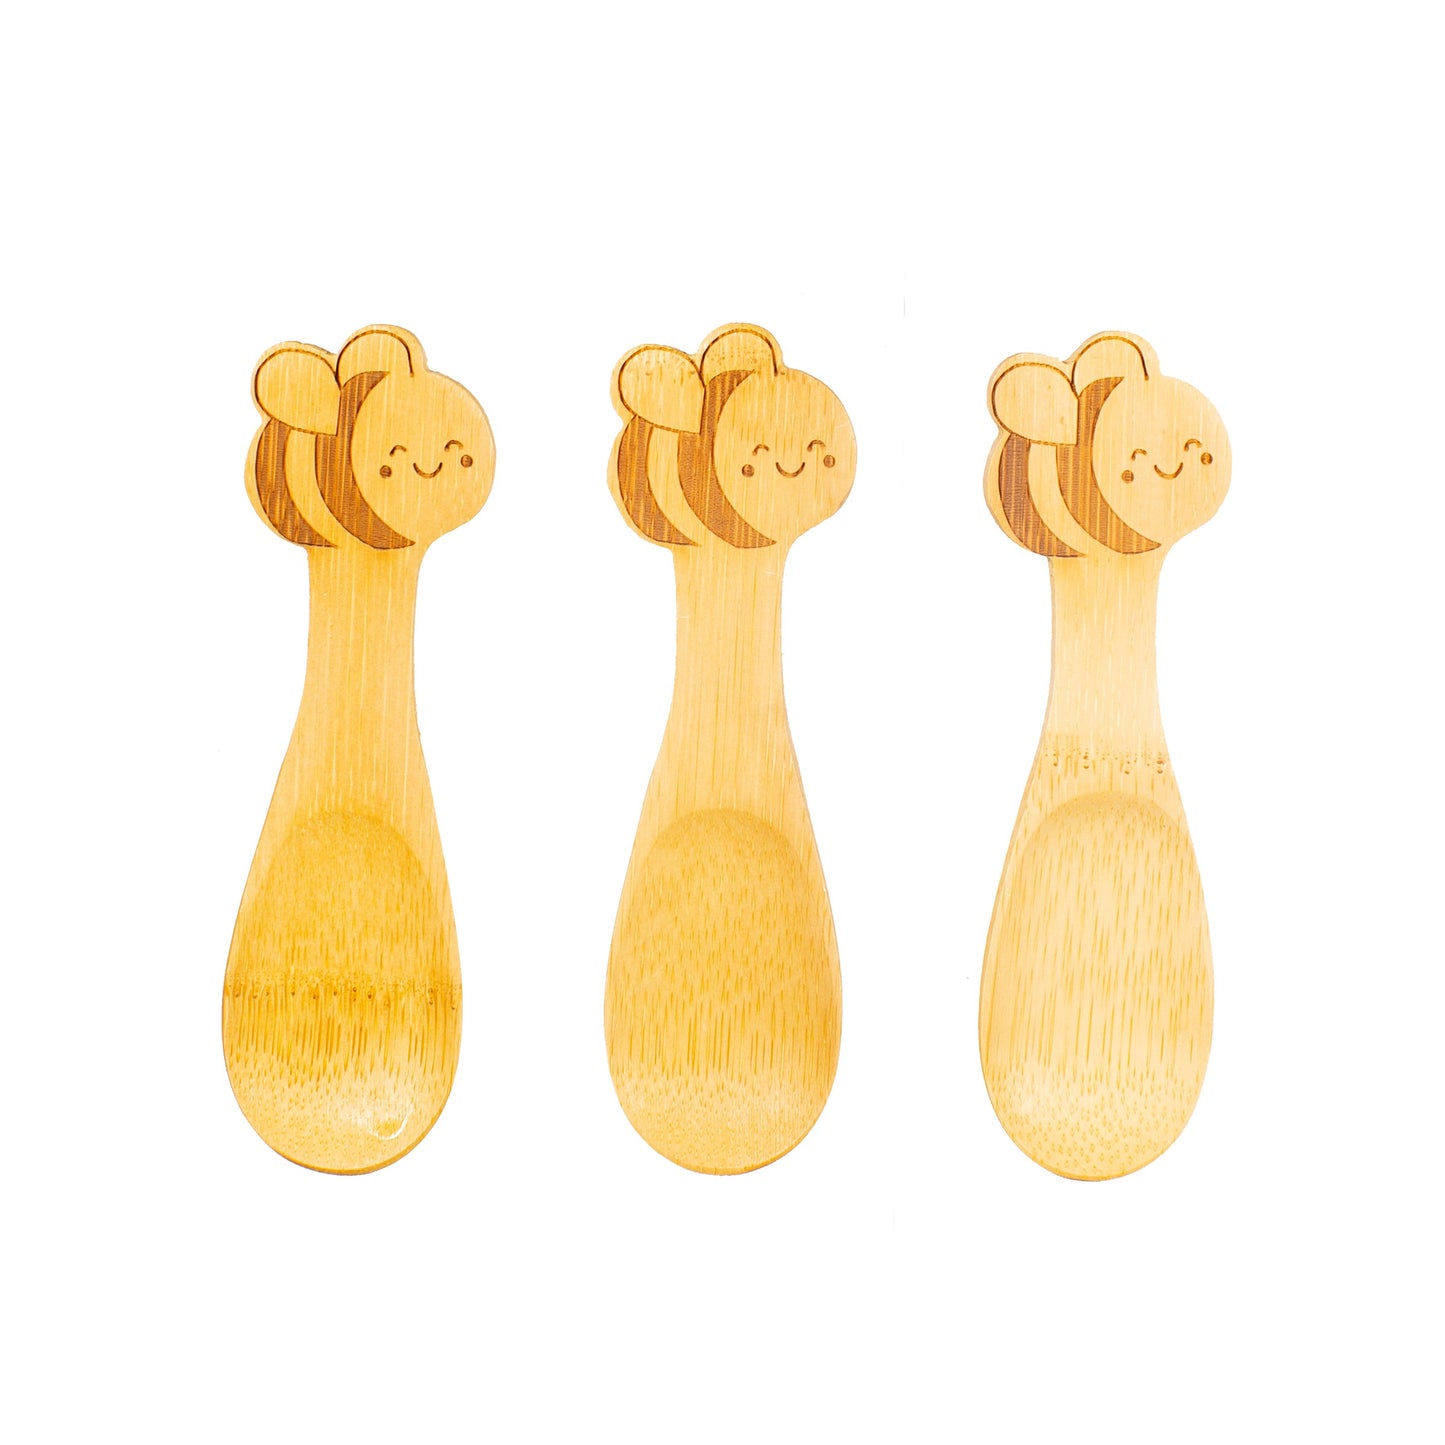 Explore nature with this planet-friendly everyday reusable bamboo spoon set featuring a cute bumble bee design.